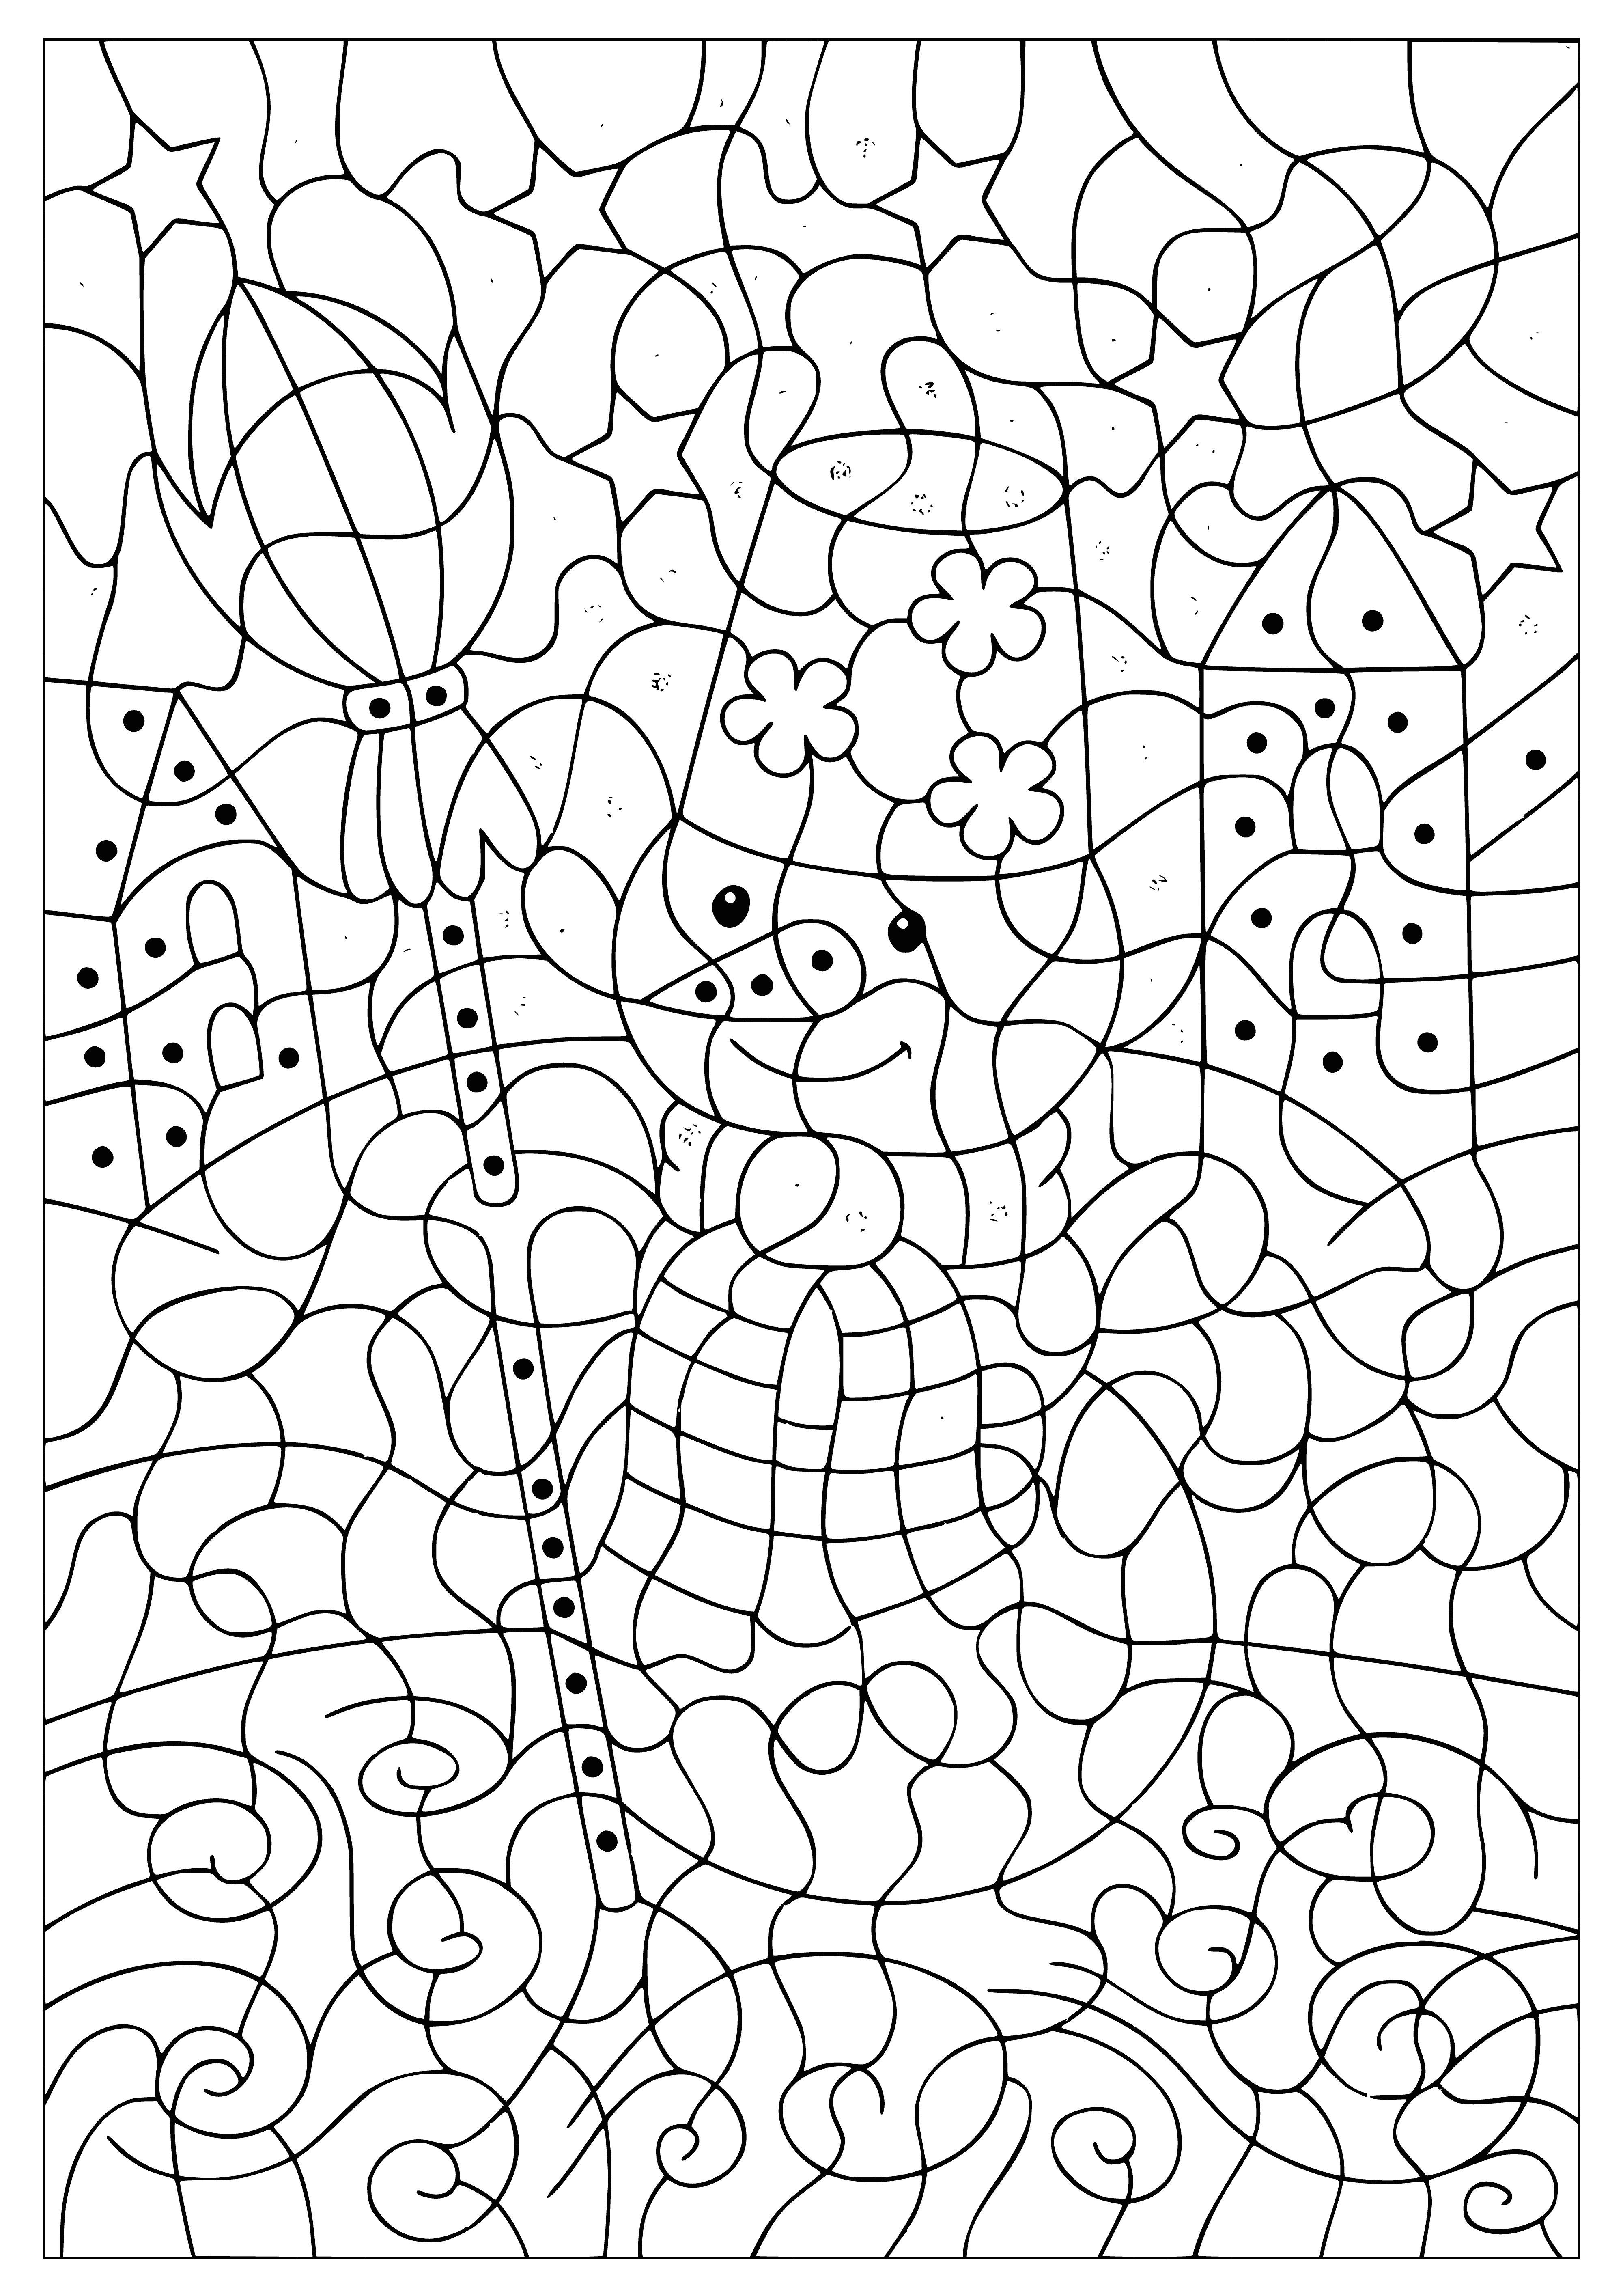 coloring page: A snowman with black eyes, a carrot nose, a top hat, and a red scarf stands off-center in the page.